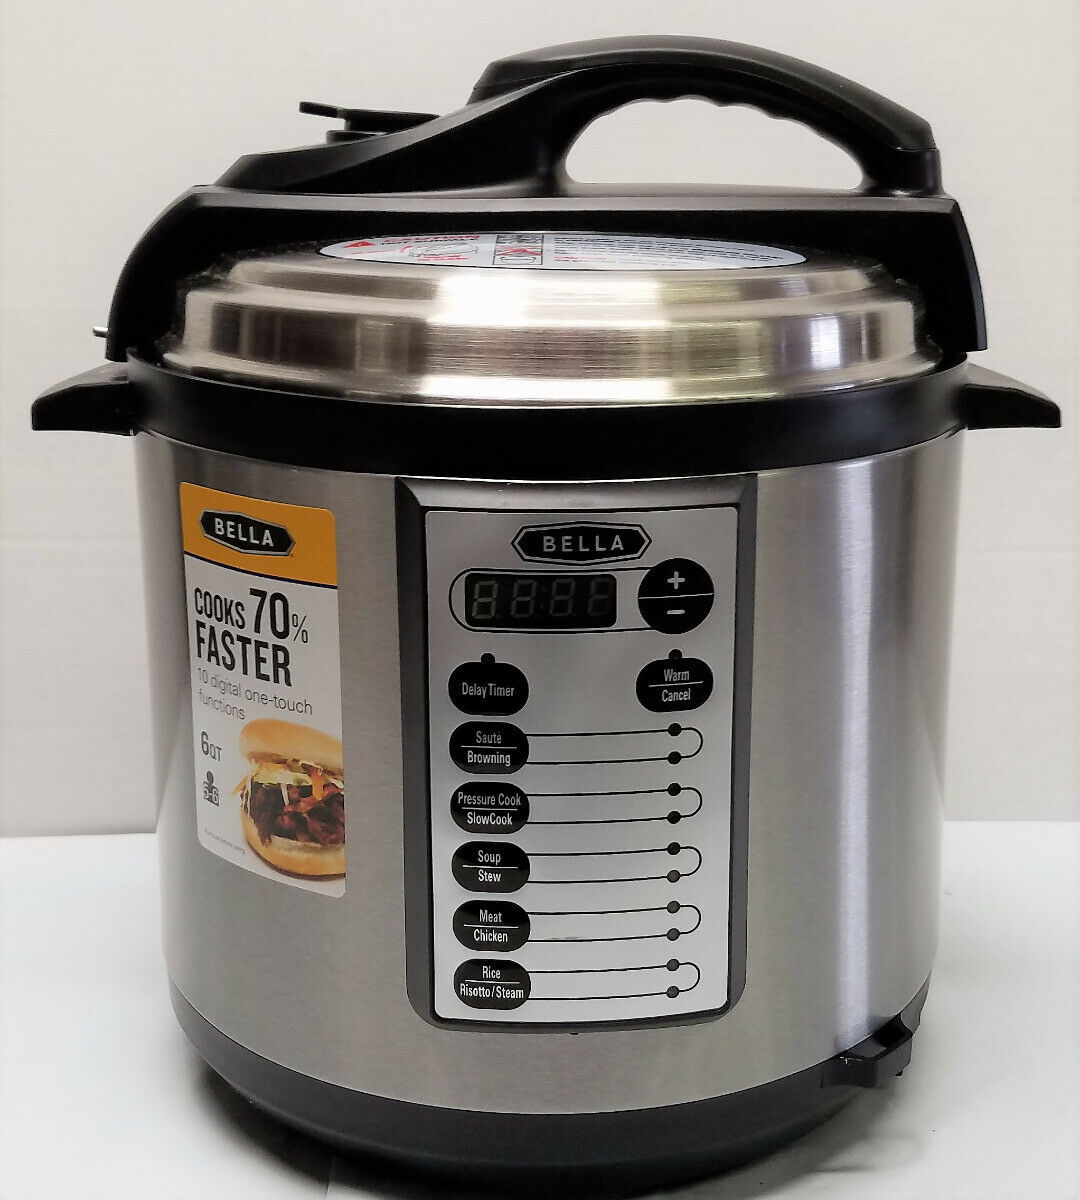 bella-6-quart-stainless-steel-electric-pressure-cooker-m-60b23g